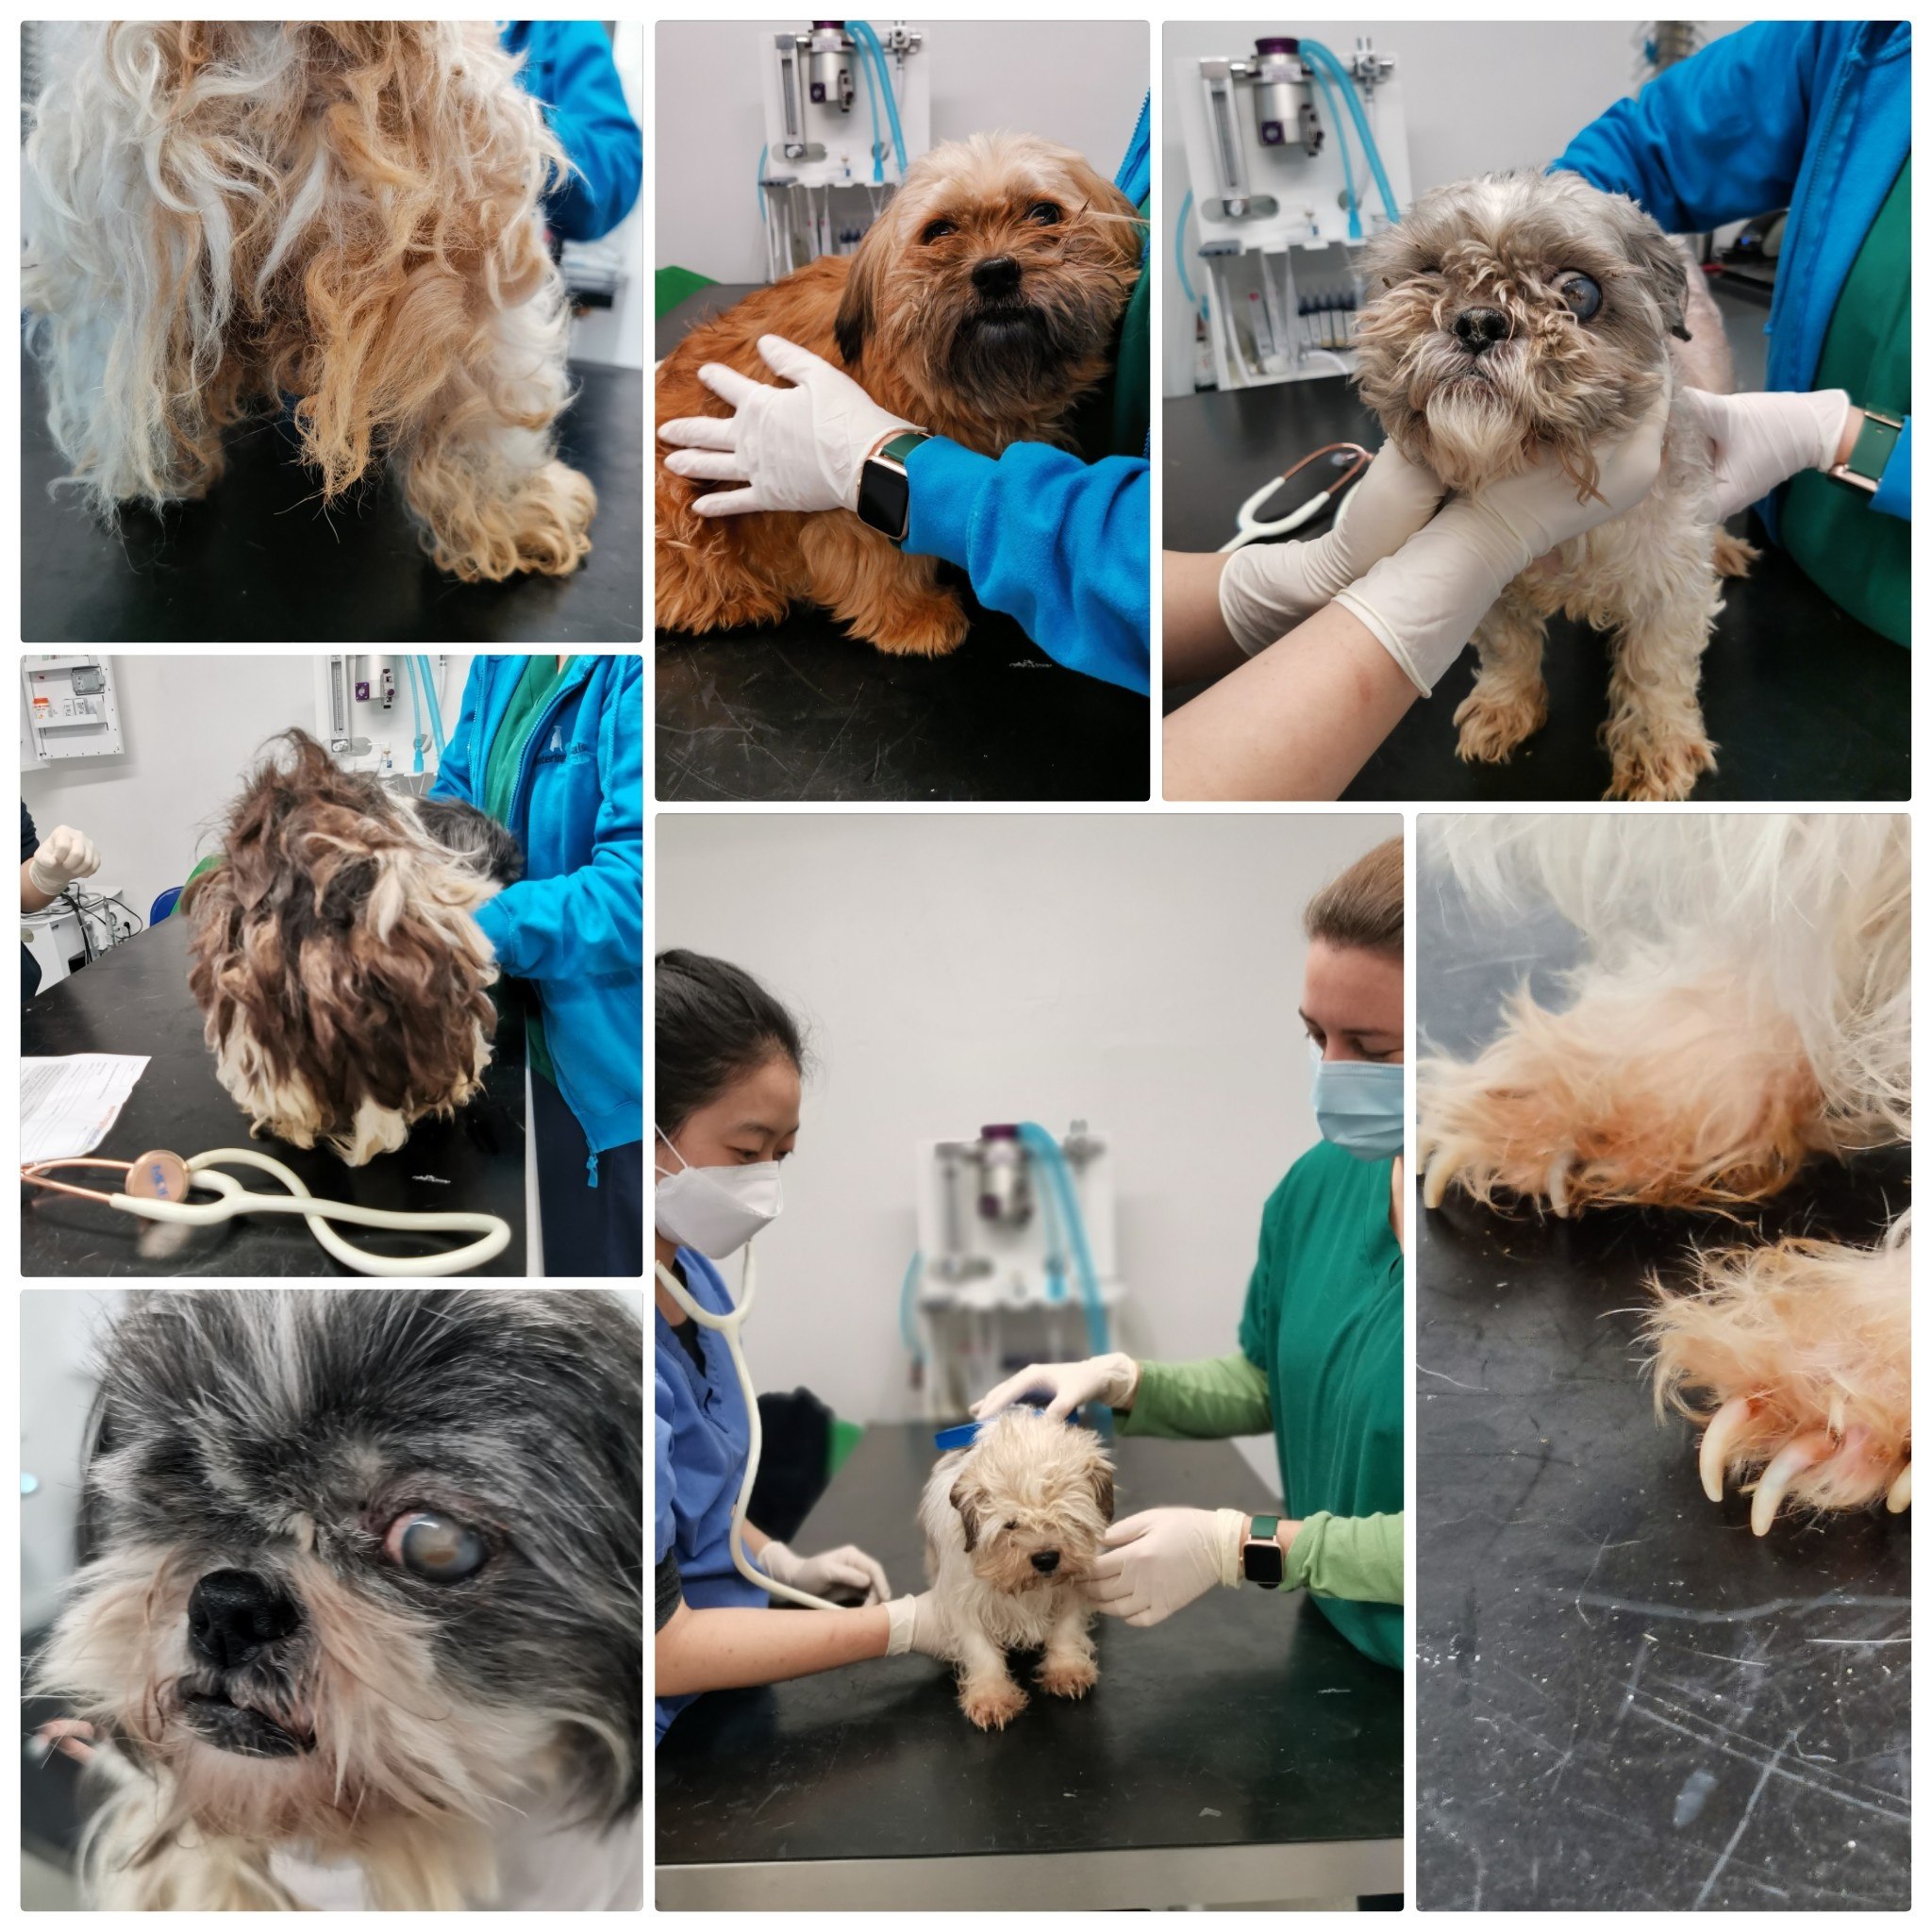 Shih Tzus getting treatment from a vet